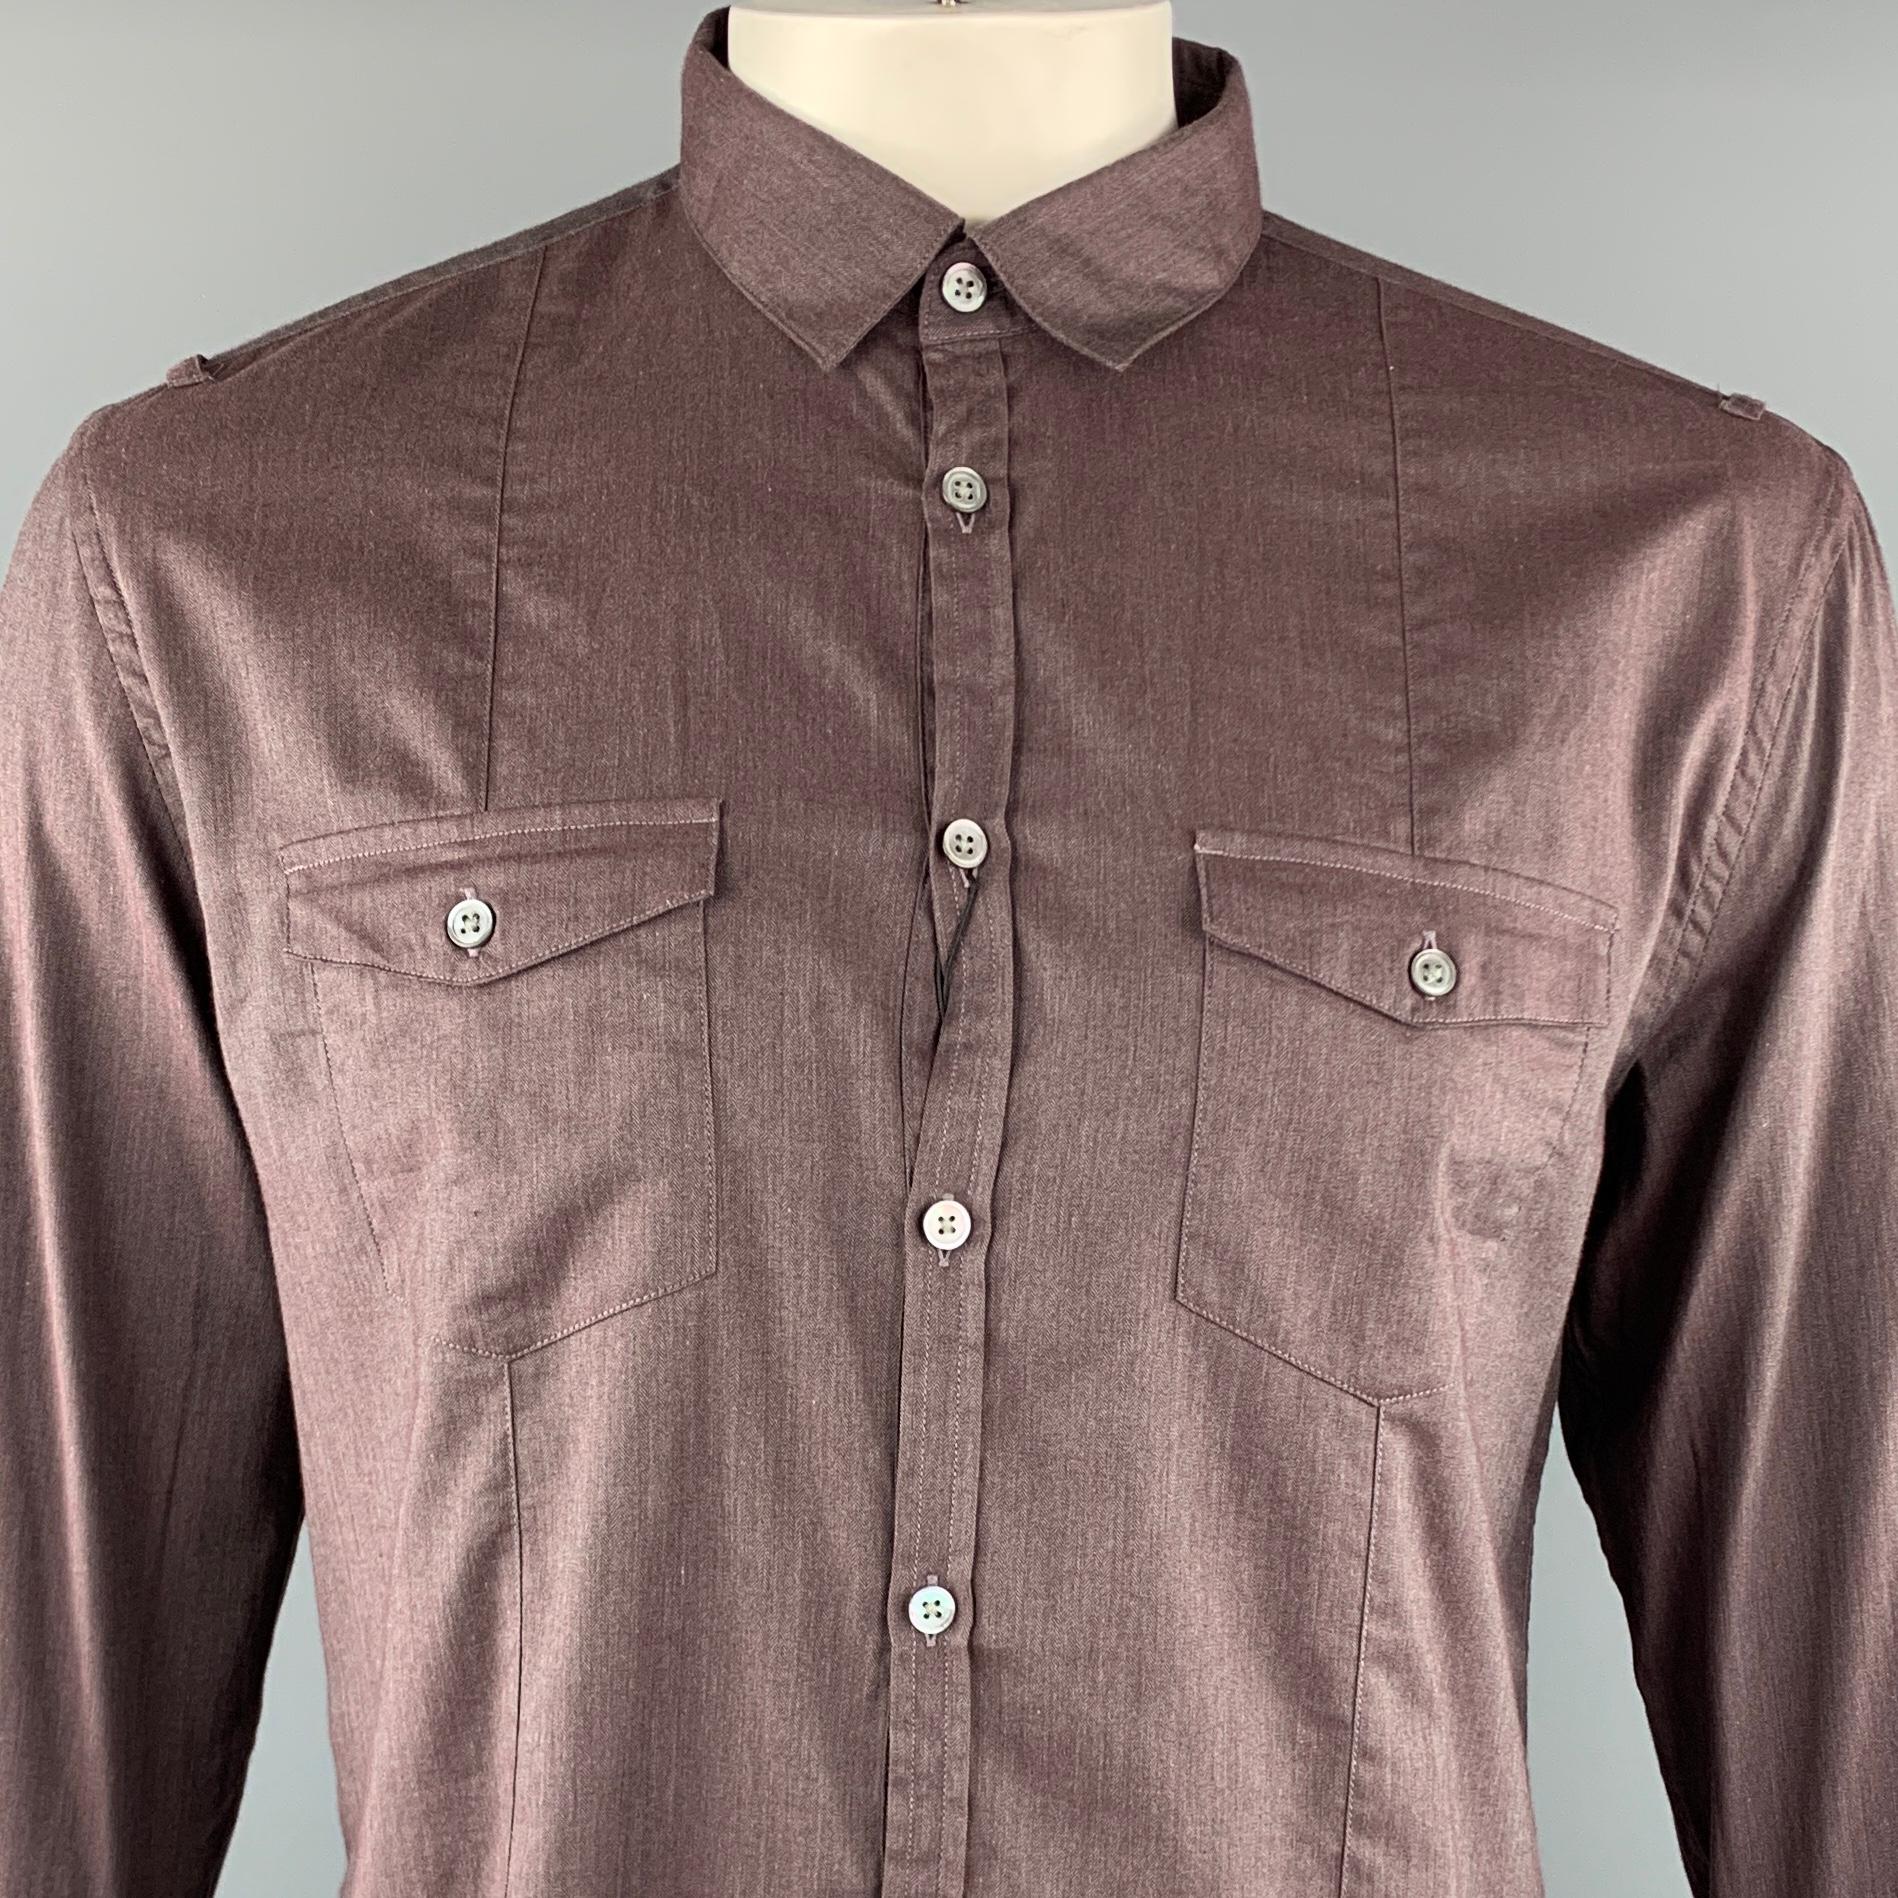 JOHN VARVATOS long sleeve shirt comes in a brown cotton featuring a button up style, patch pockets, shoulder loop details, and a spread collar.

New With Tags.
Marked: L

Measurements:

Shoulder: 18.5 in.
Chest: 45 in.
Sleeve: 26.5 in.
Length: 26 in,